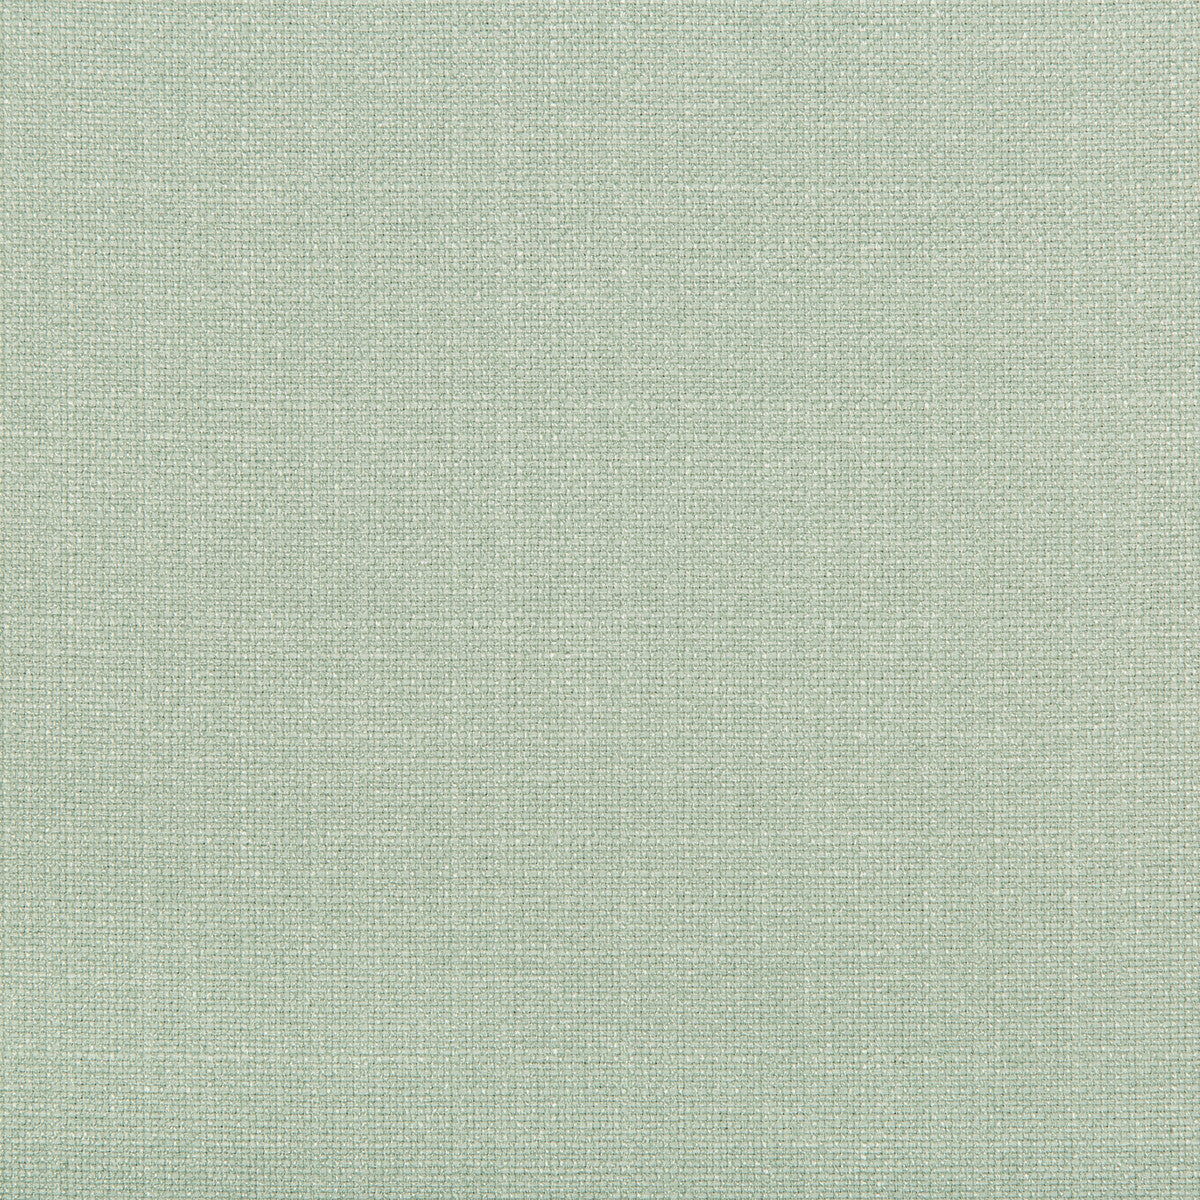 Kravet Contract fabric in 4642-13 color - pattern 4642.13.0 - by Kravet Contract